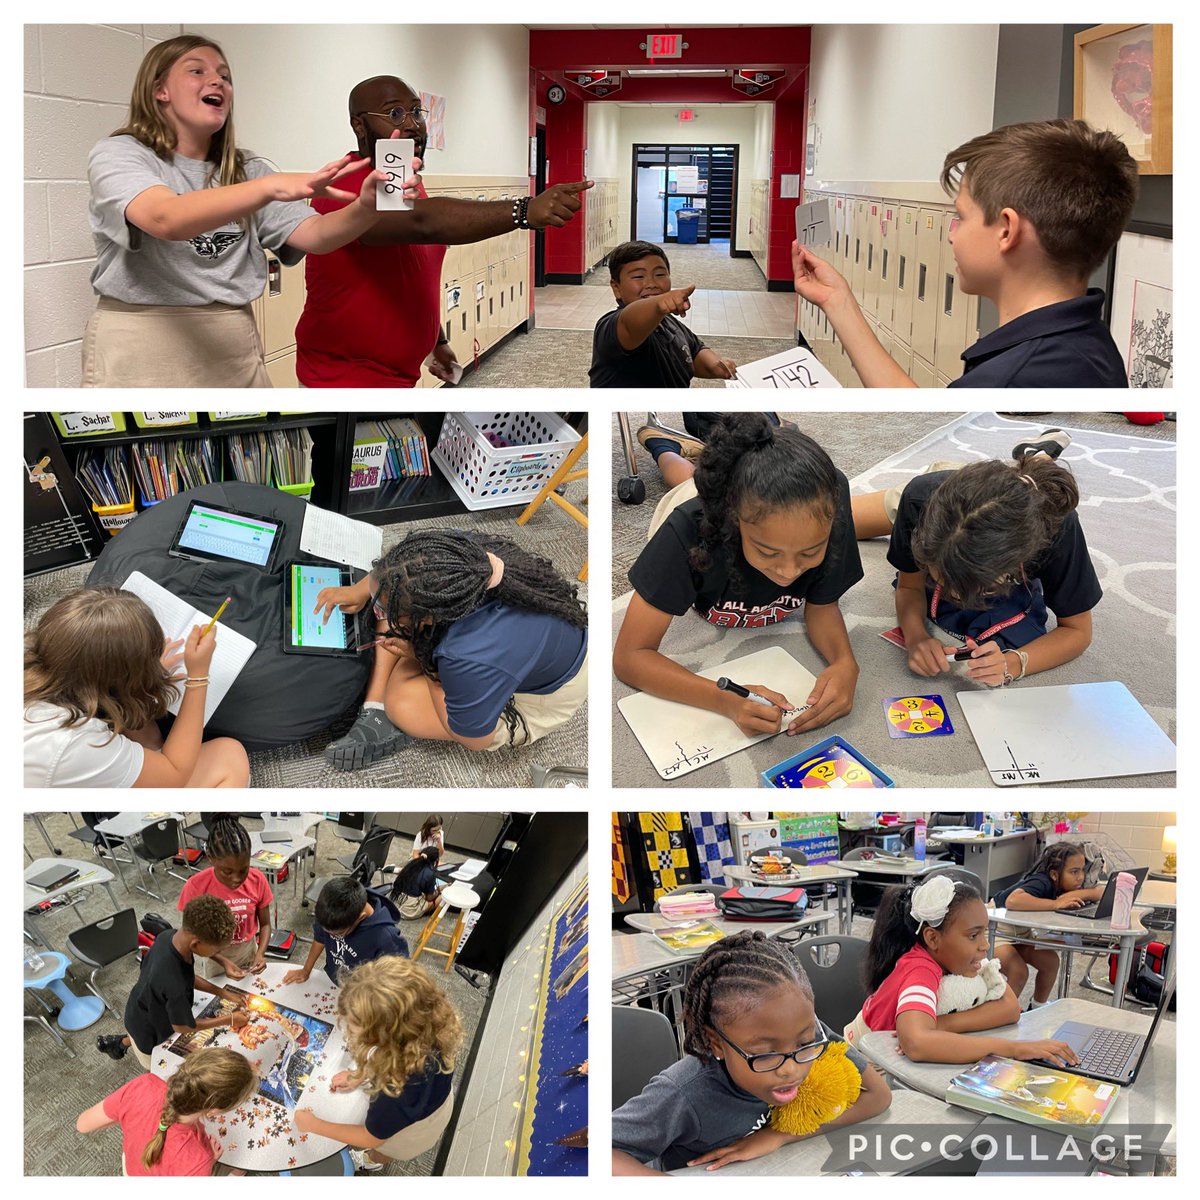 Friday math stations after our lesson on adding and subtracting decimals. Even our amazing counselor Mr. Lawrence got in on the fun!!! #woodwardway @WoodwardAcademy @dandyphillips13